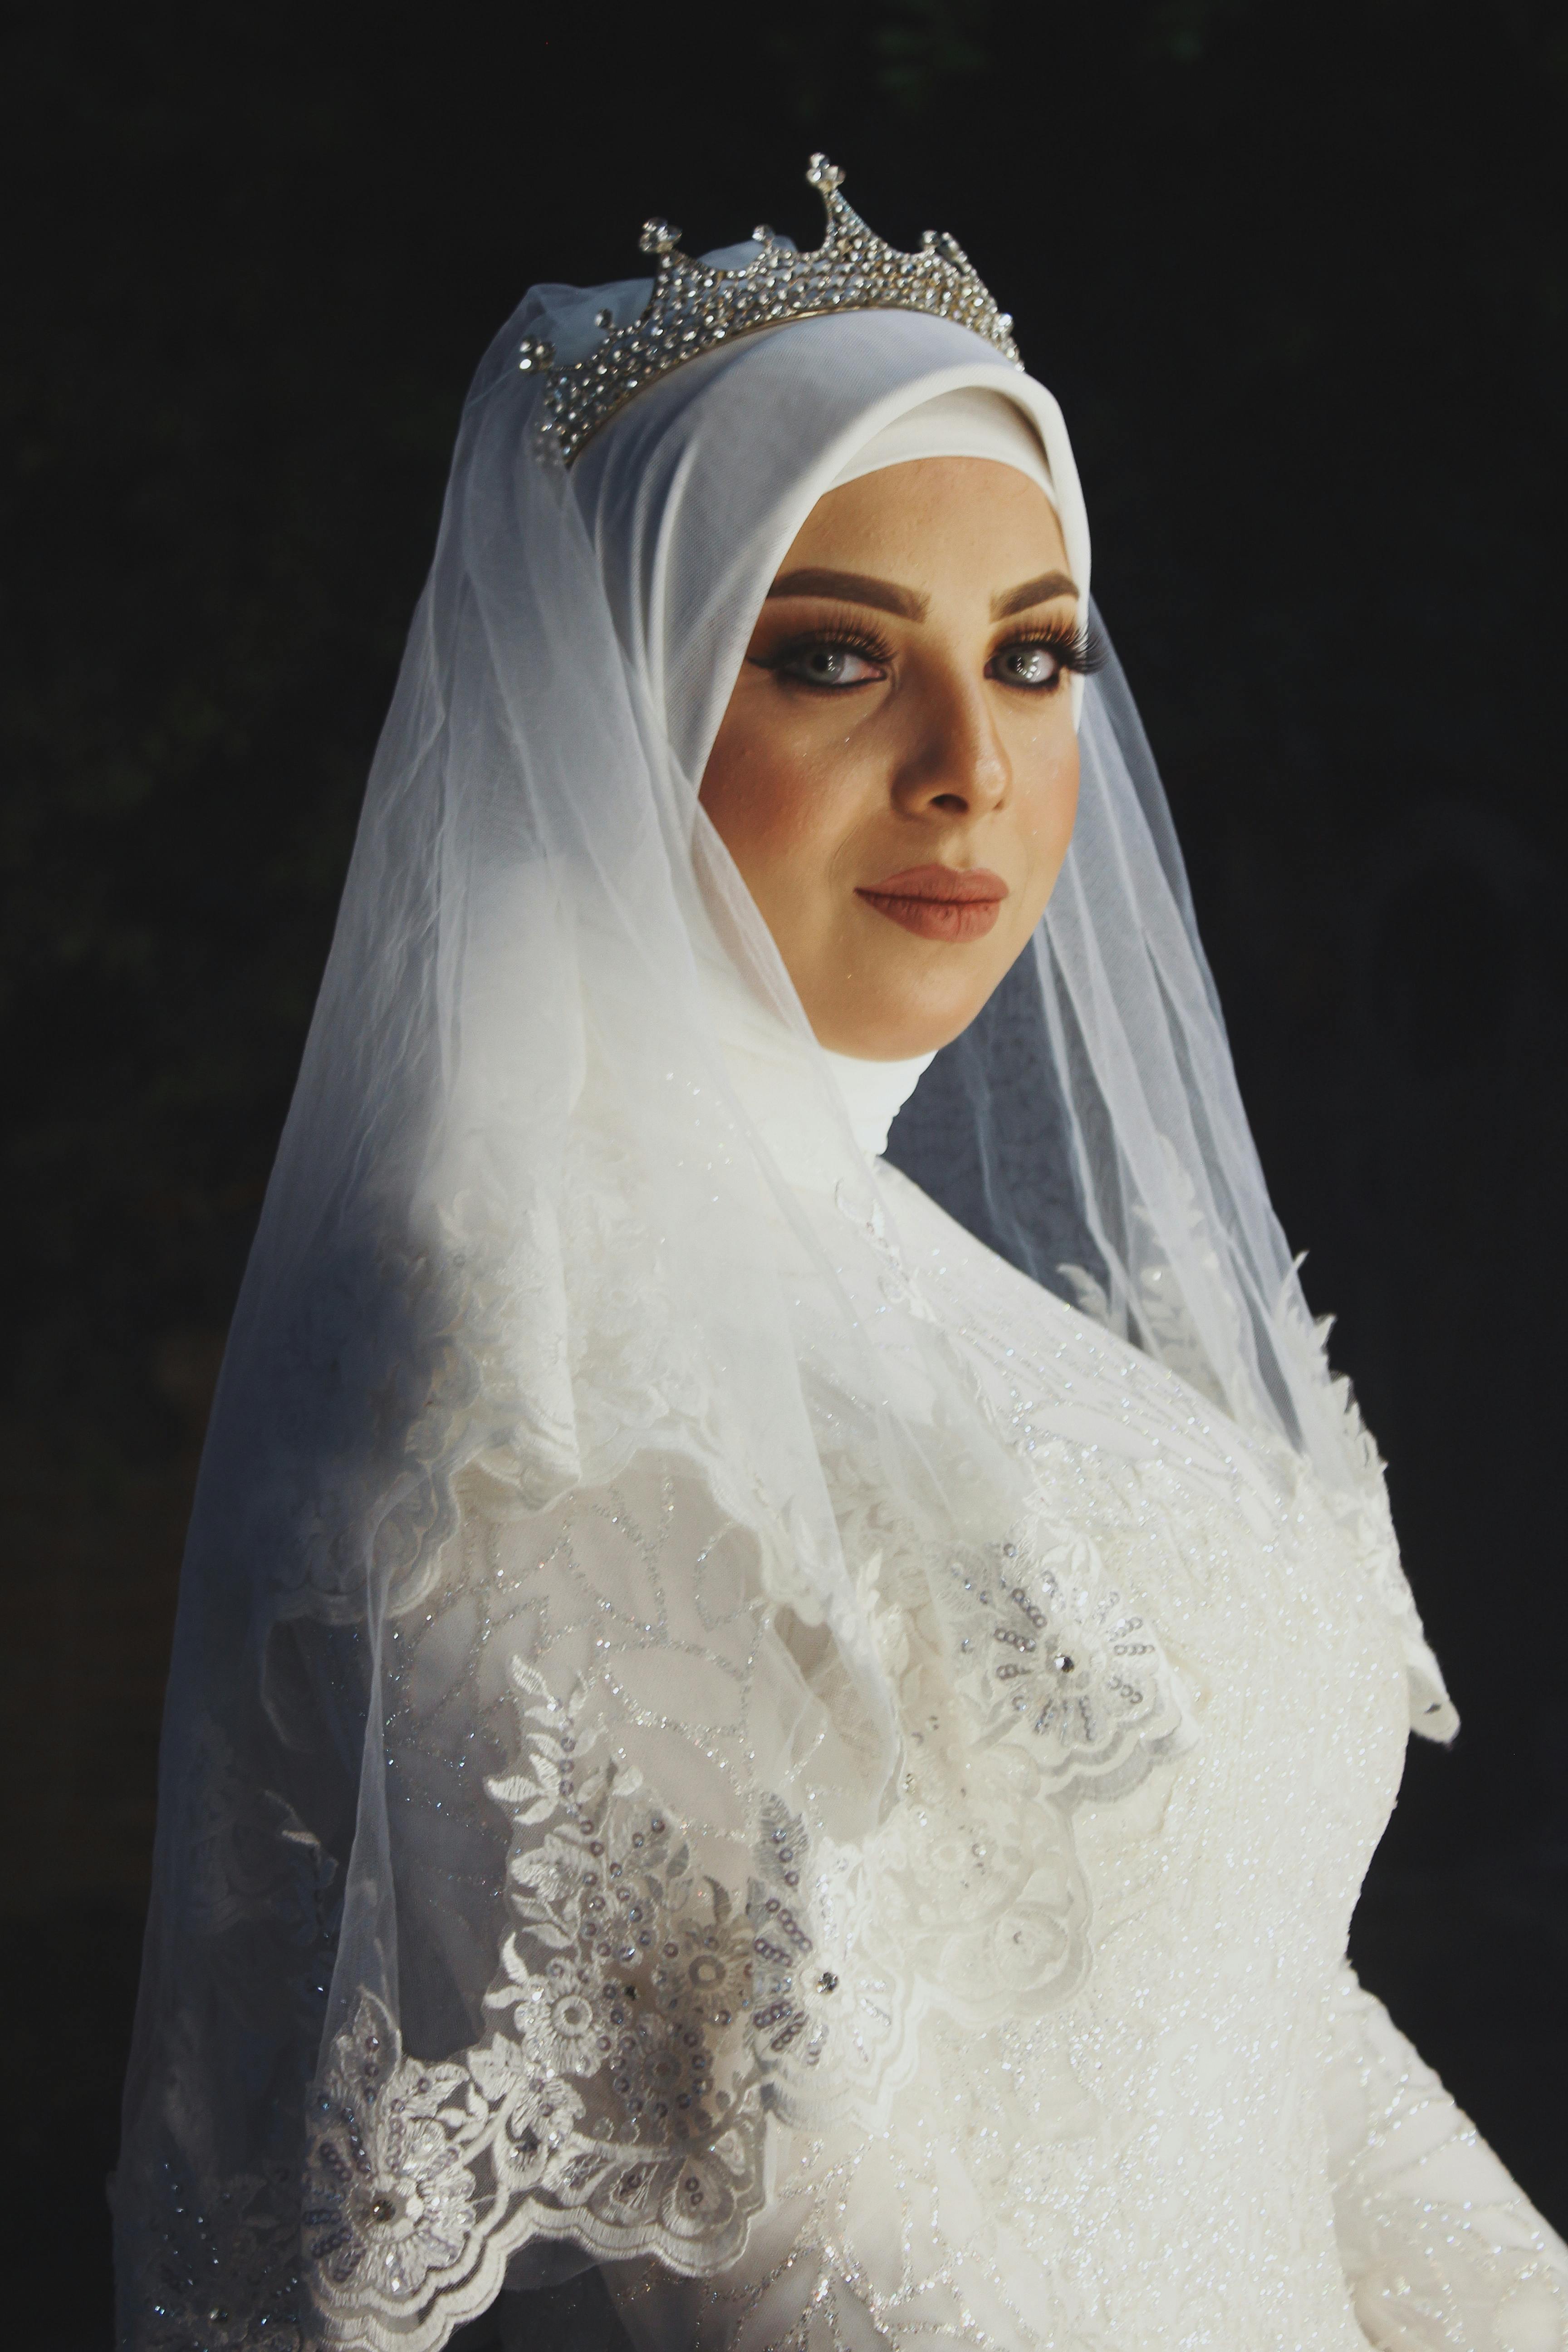 Arabic Vintage Muslim Wedding Dresses Long Sleeves High Collar Lace Beaded  Cathedral Train Customize Wedding Gowns With Veil Lebanese Wedding Dress  From Dresstop, $435.38 | DHgate.Com